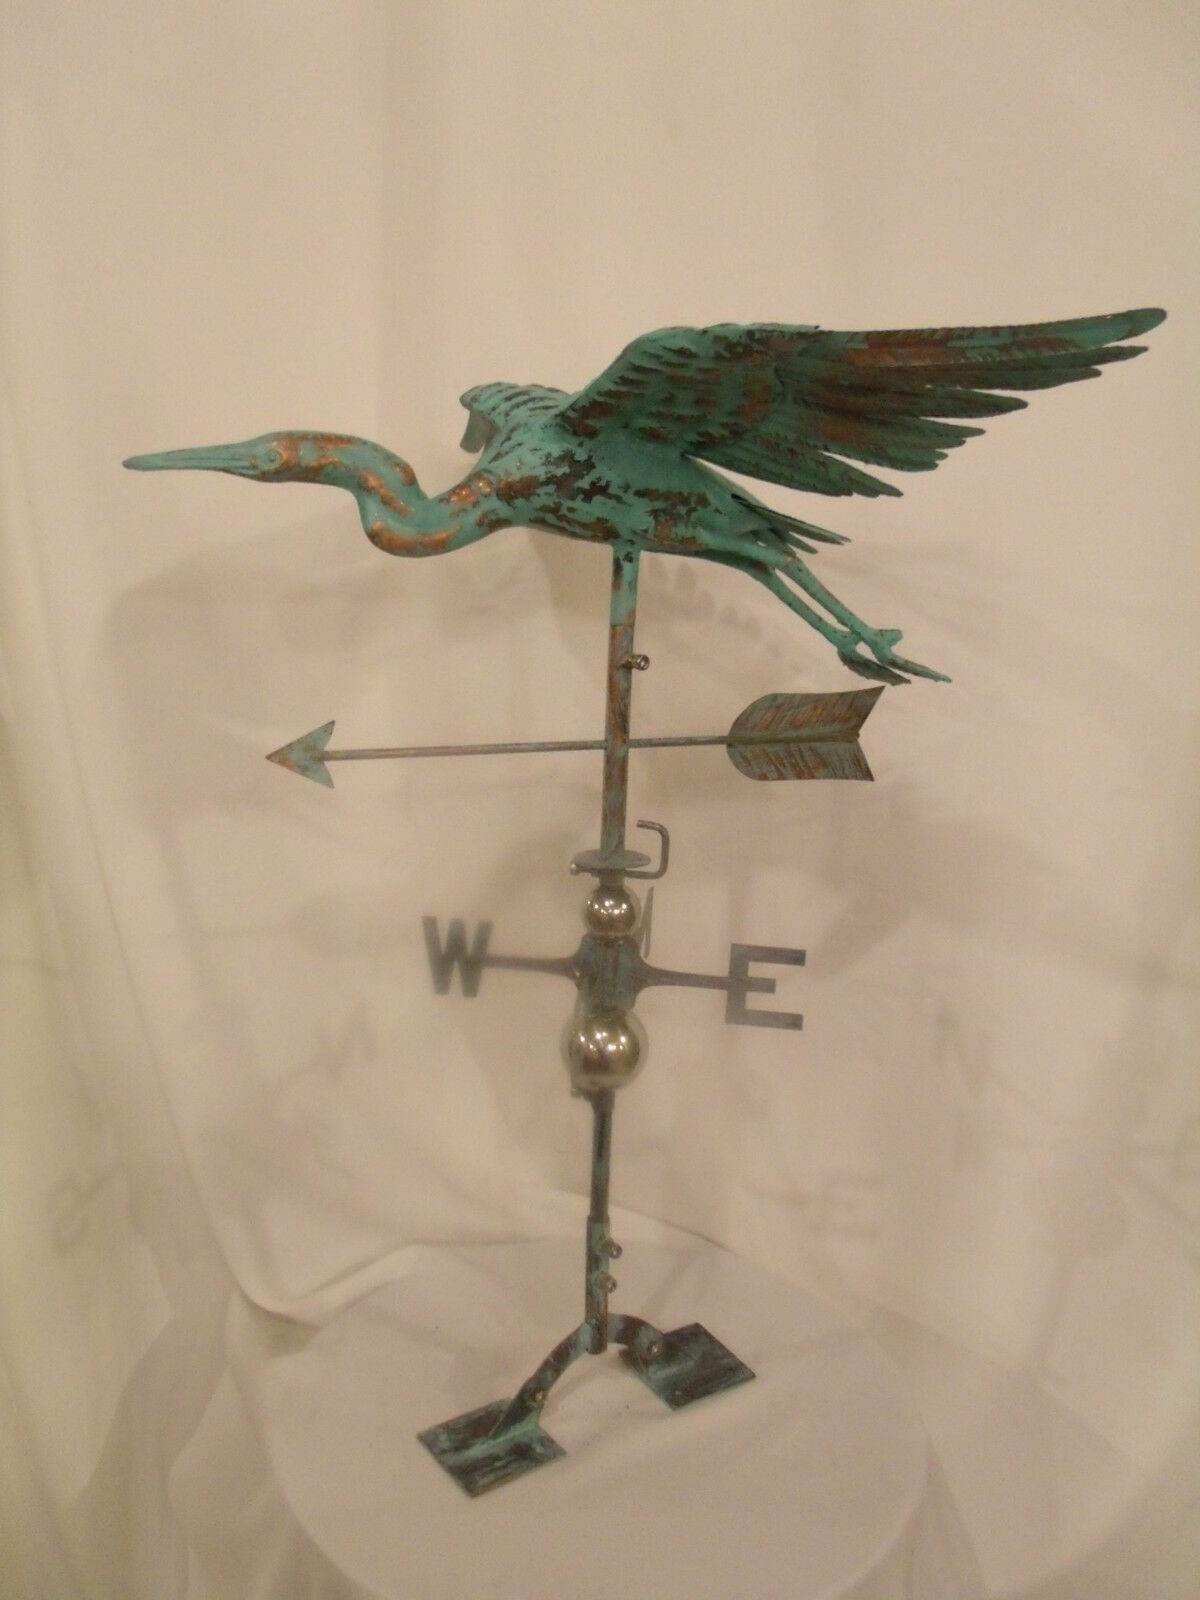 LARGE Handcrafted 3D 3-Dimensional CRANE HERON Weathervane Copper Patina Finish